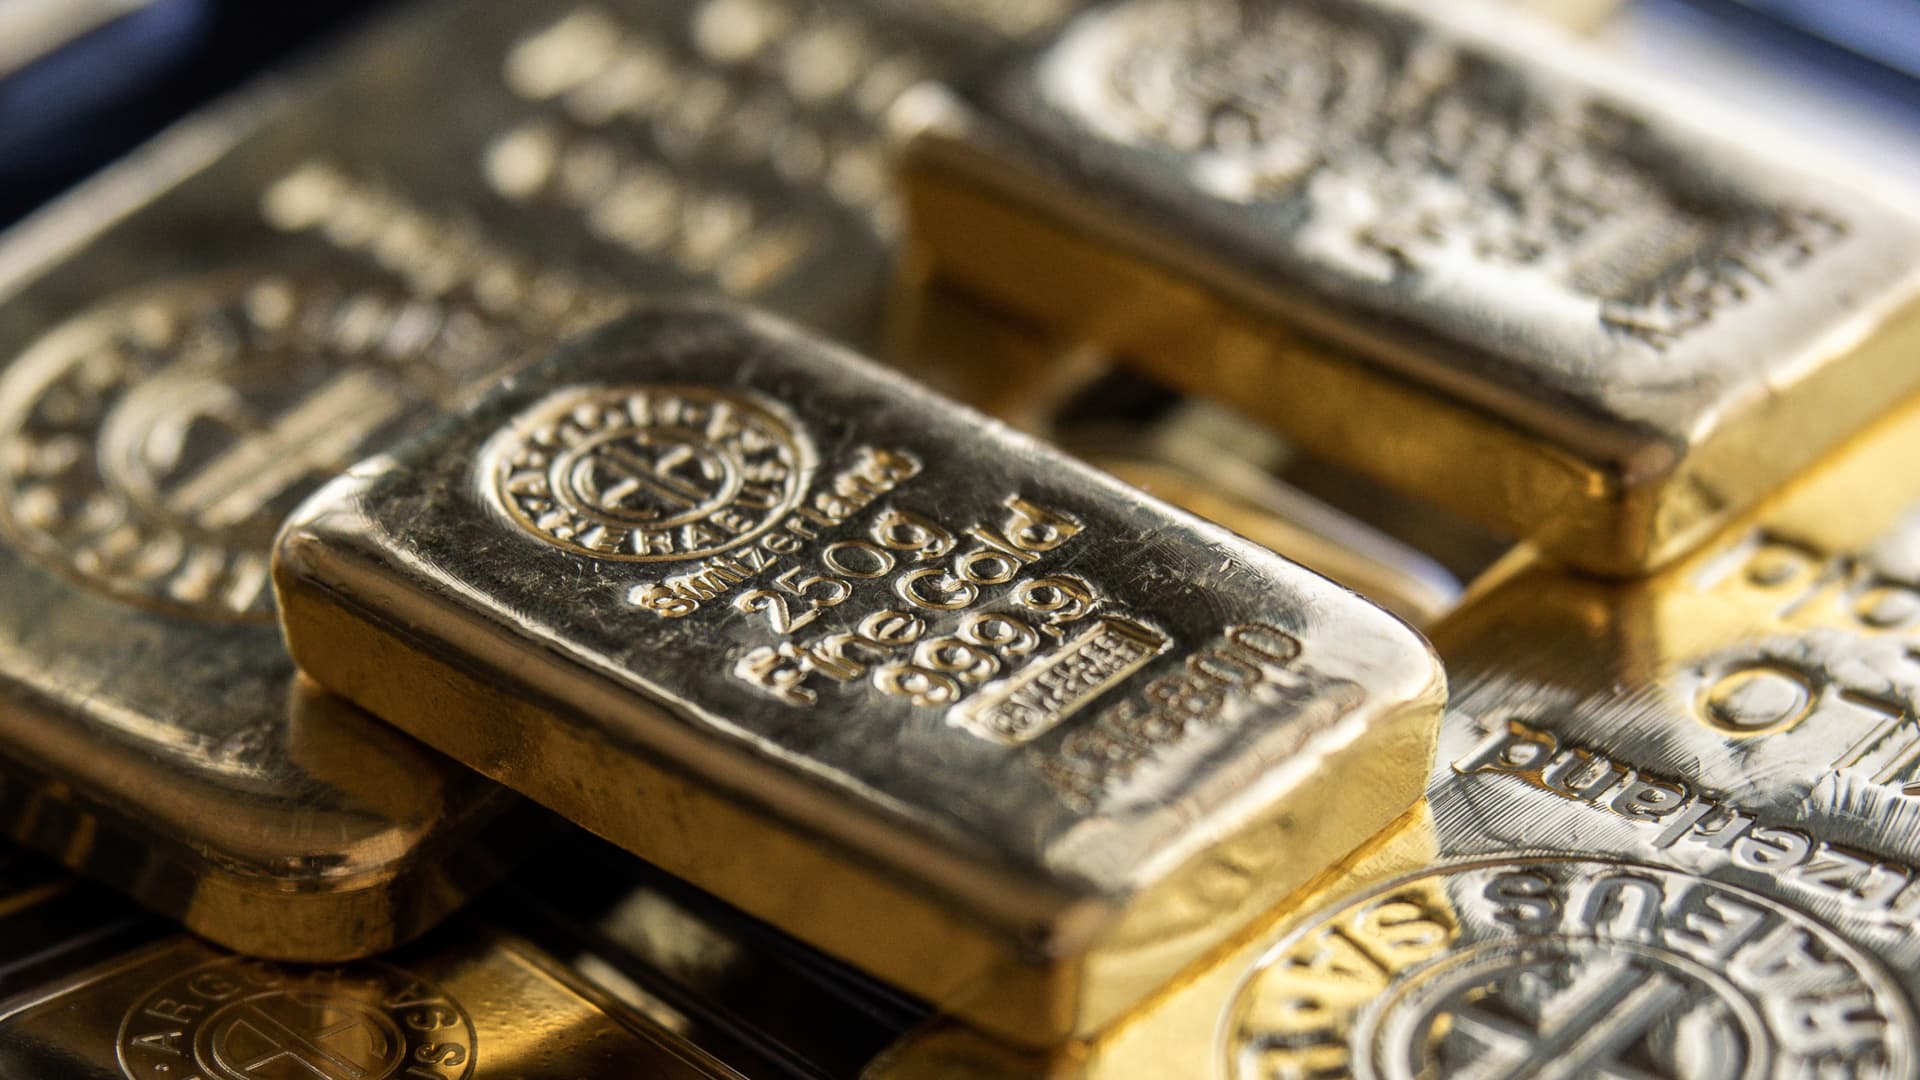 The biggest money managers are flocking to gold as inflation fears rise